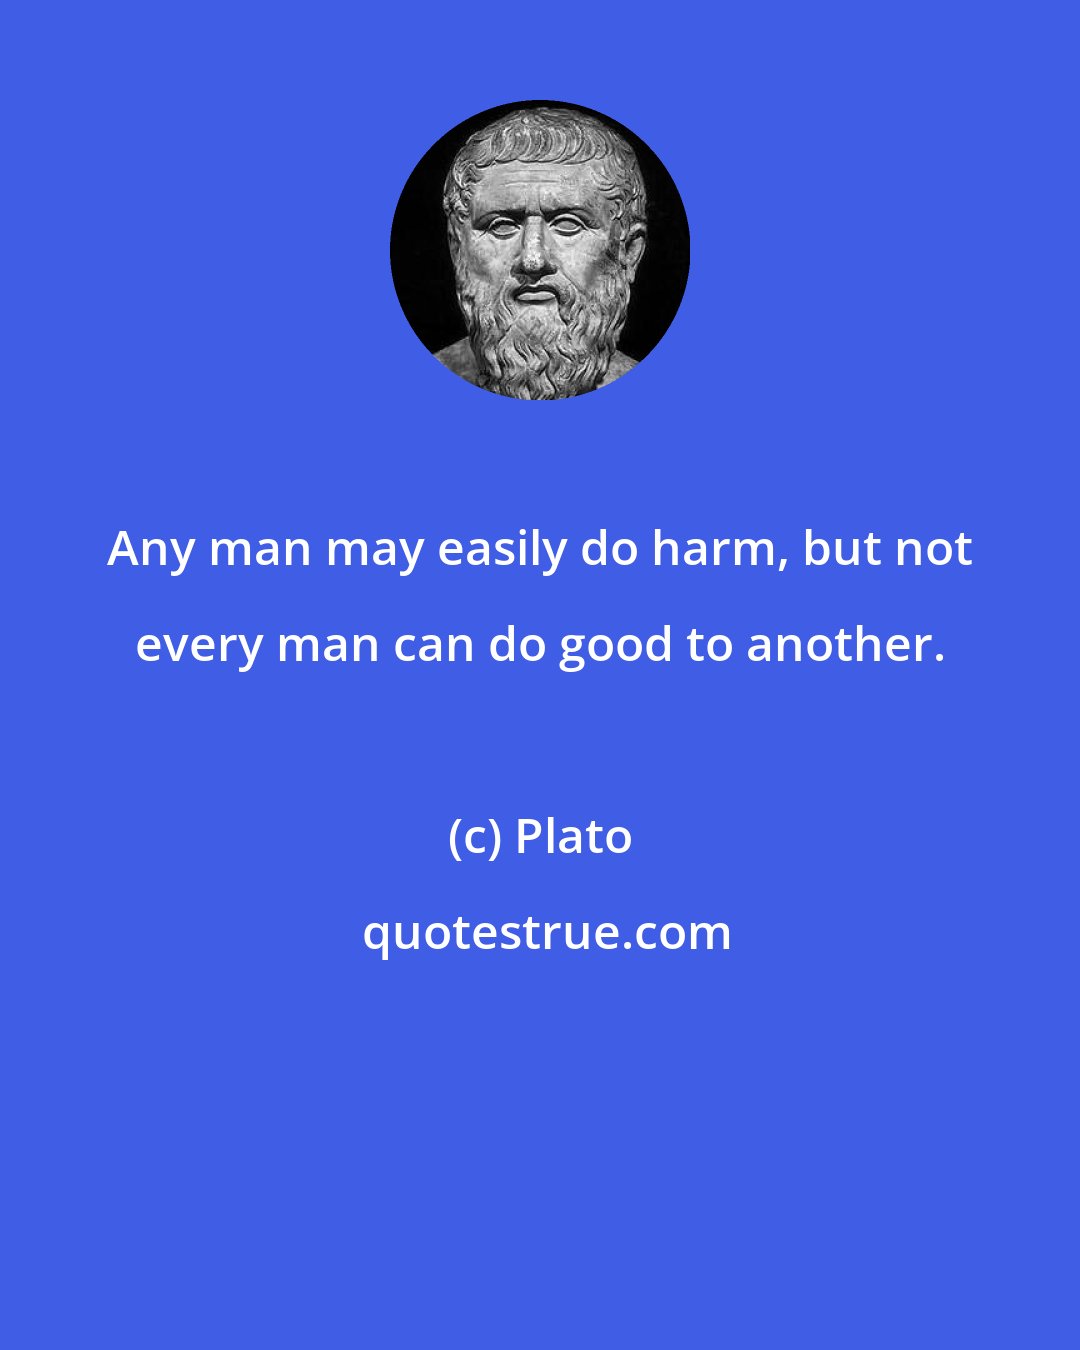 Plato: Any man may easily do harm, but not every man can do good to another.